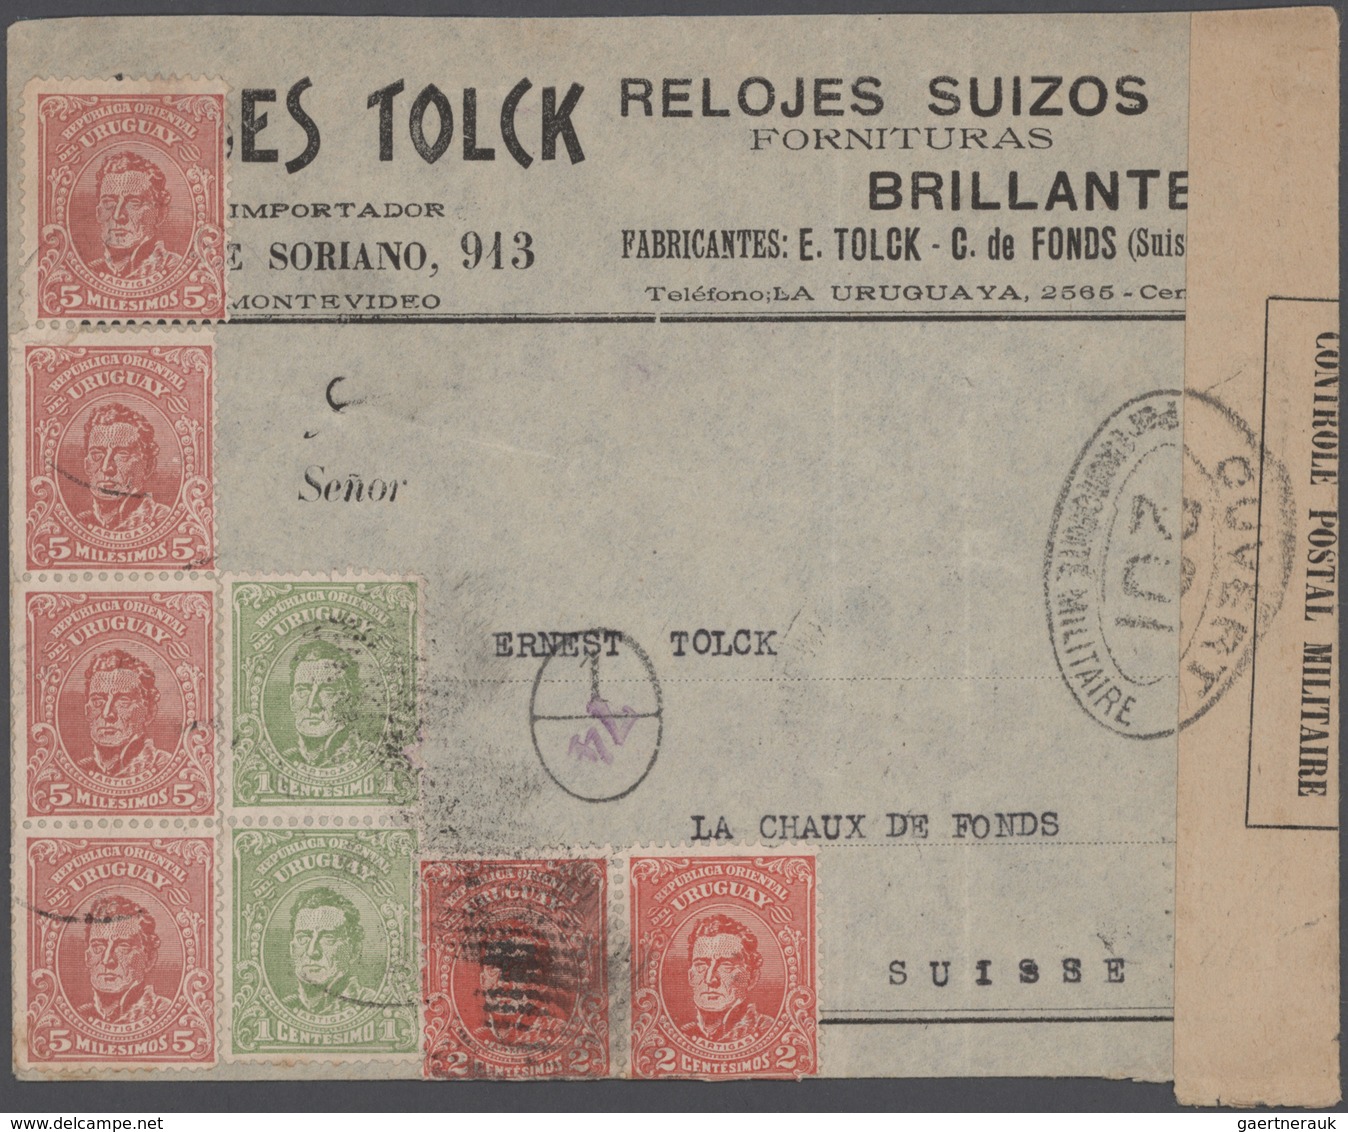 Uruguay: 1880/1957 (ca.), covers (26) and mostly used stationery (6), to be inspected. (ex Weserland